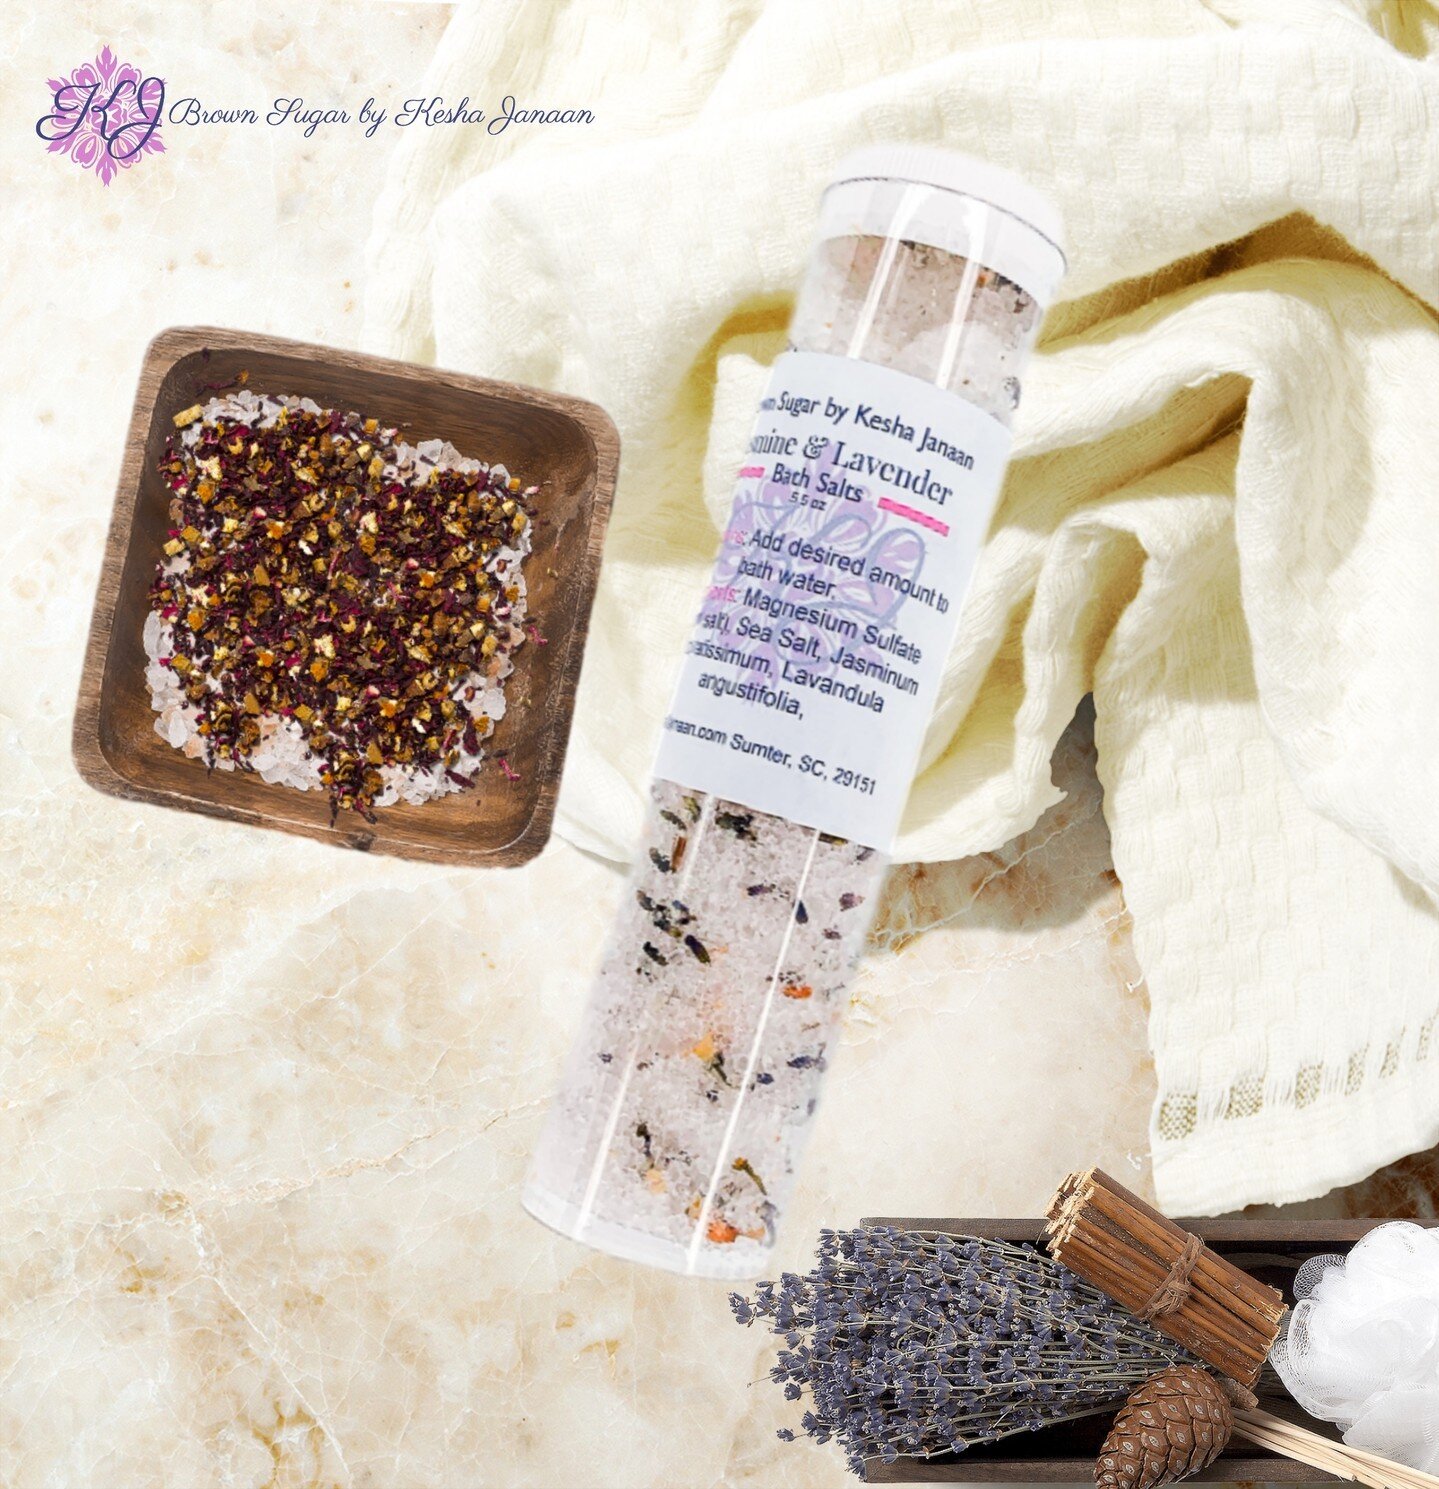 Soothe and relax your body and mind with our Jasmine and Lavender bath salts. These natural bath salts are known to reduce stress, stimulate circulation, and promote relaxation. Enjoy a luxurious spa experience in the comfort of your own home!
Link i